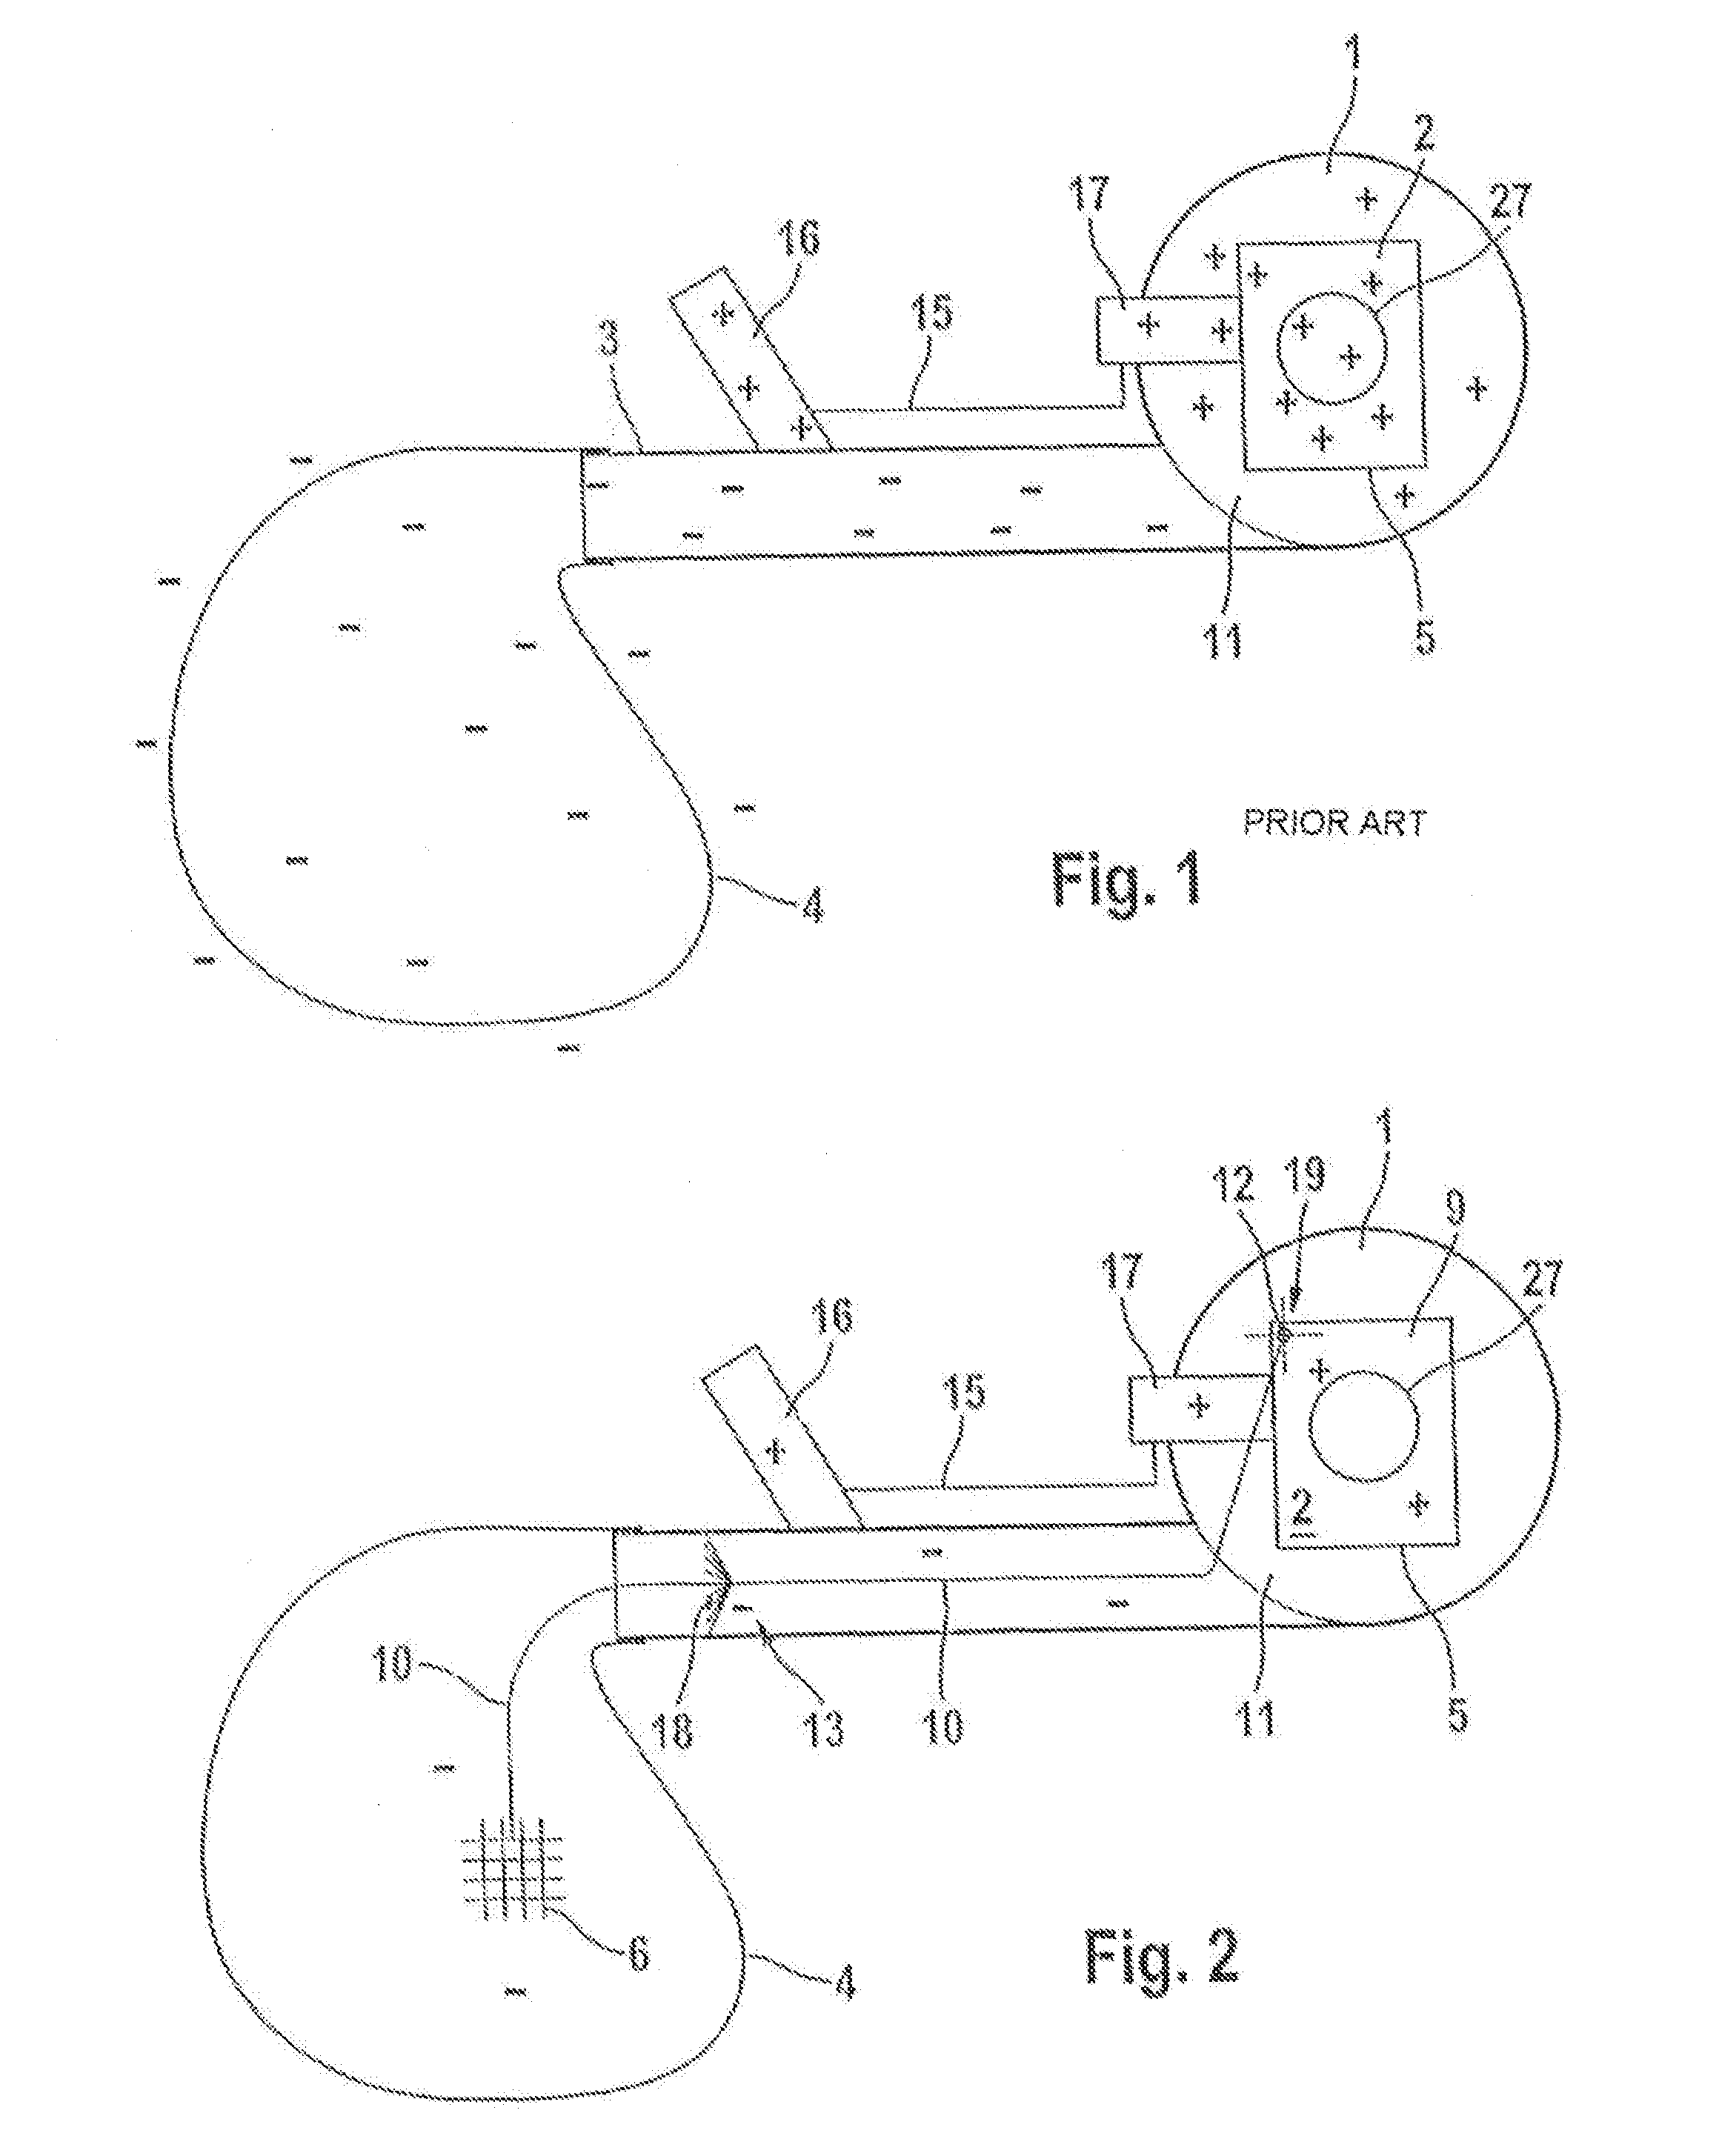 Suction device/blower